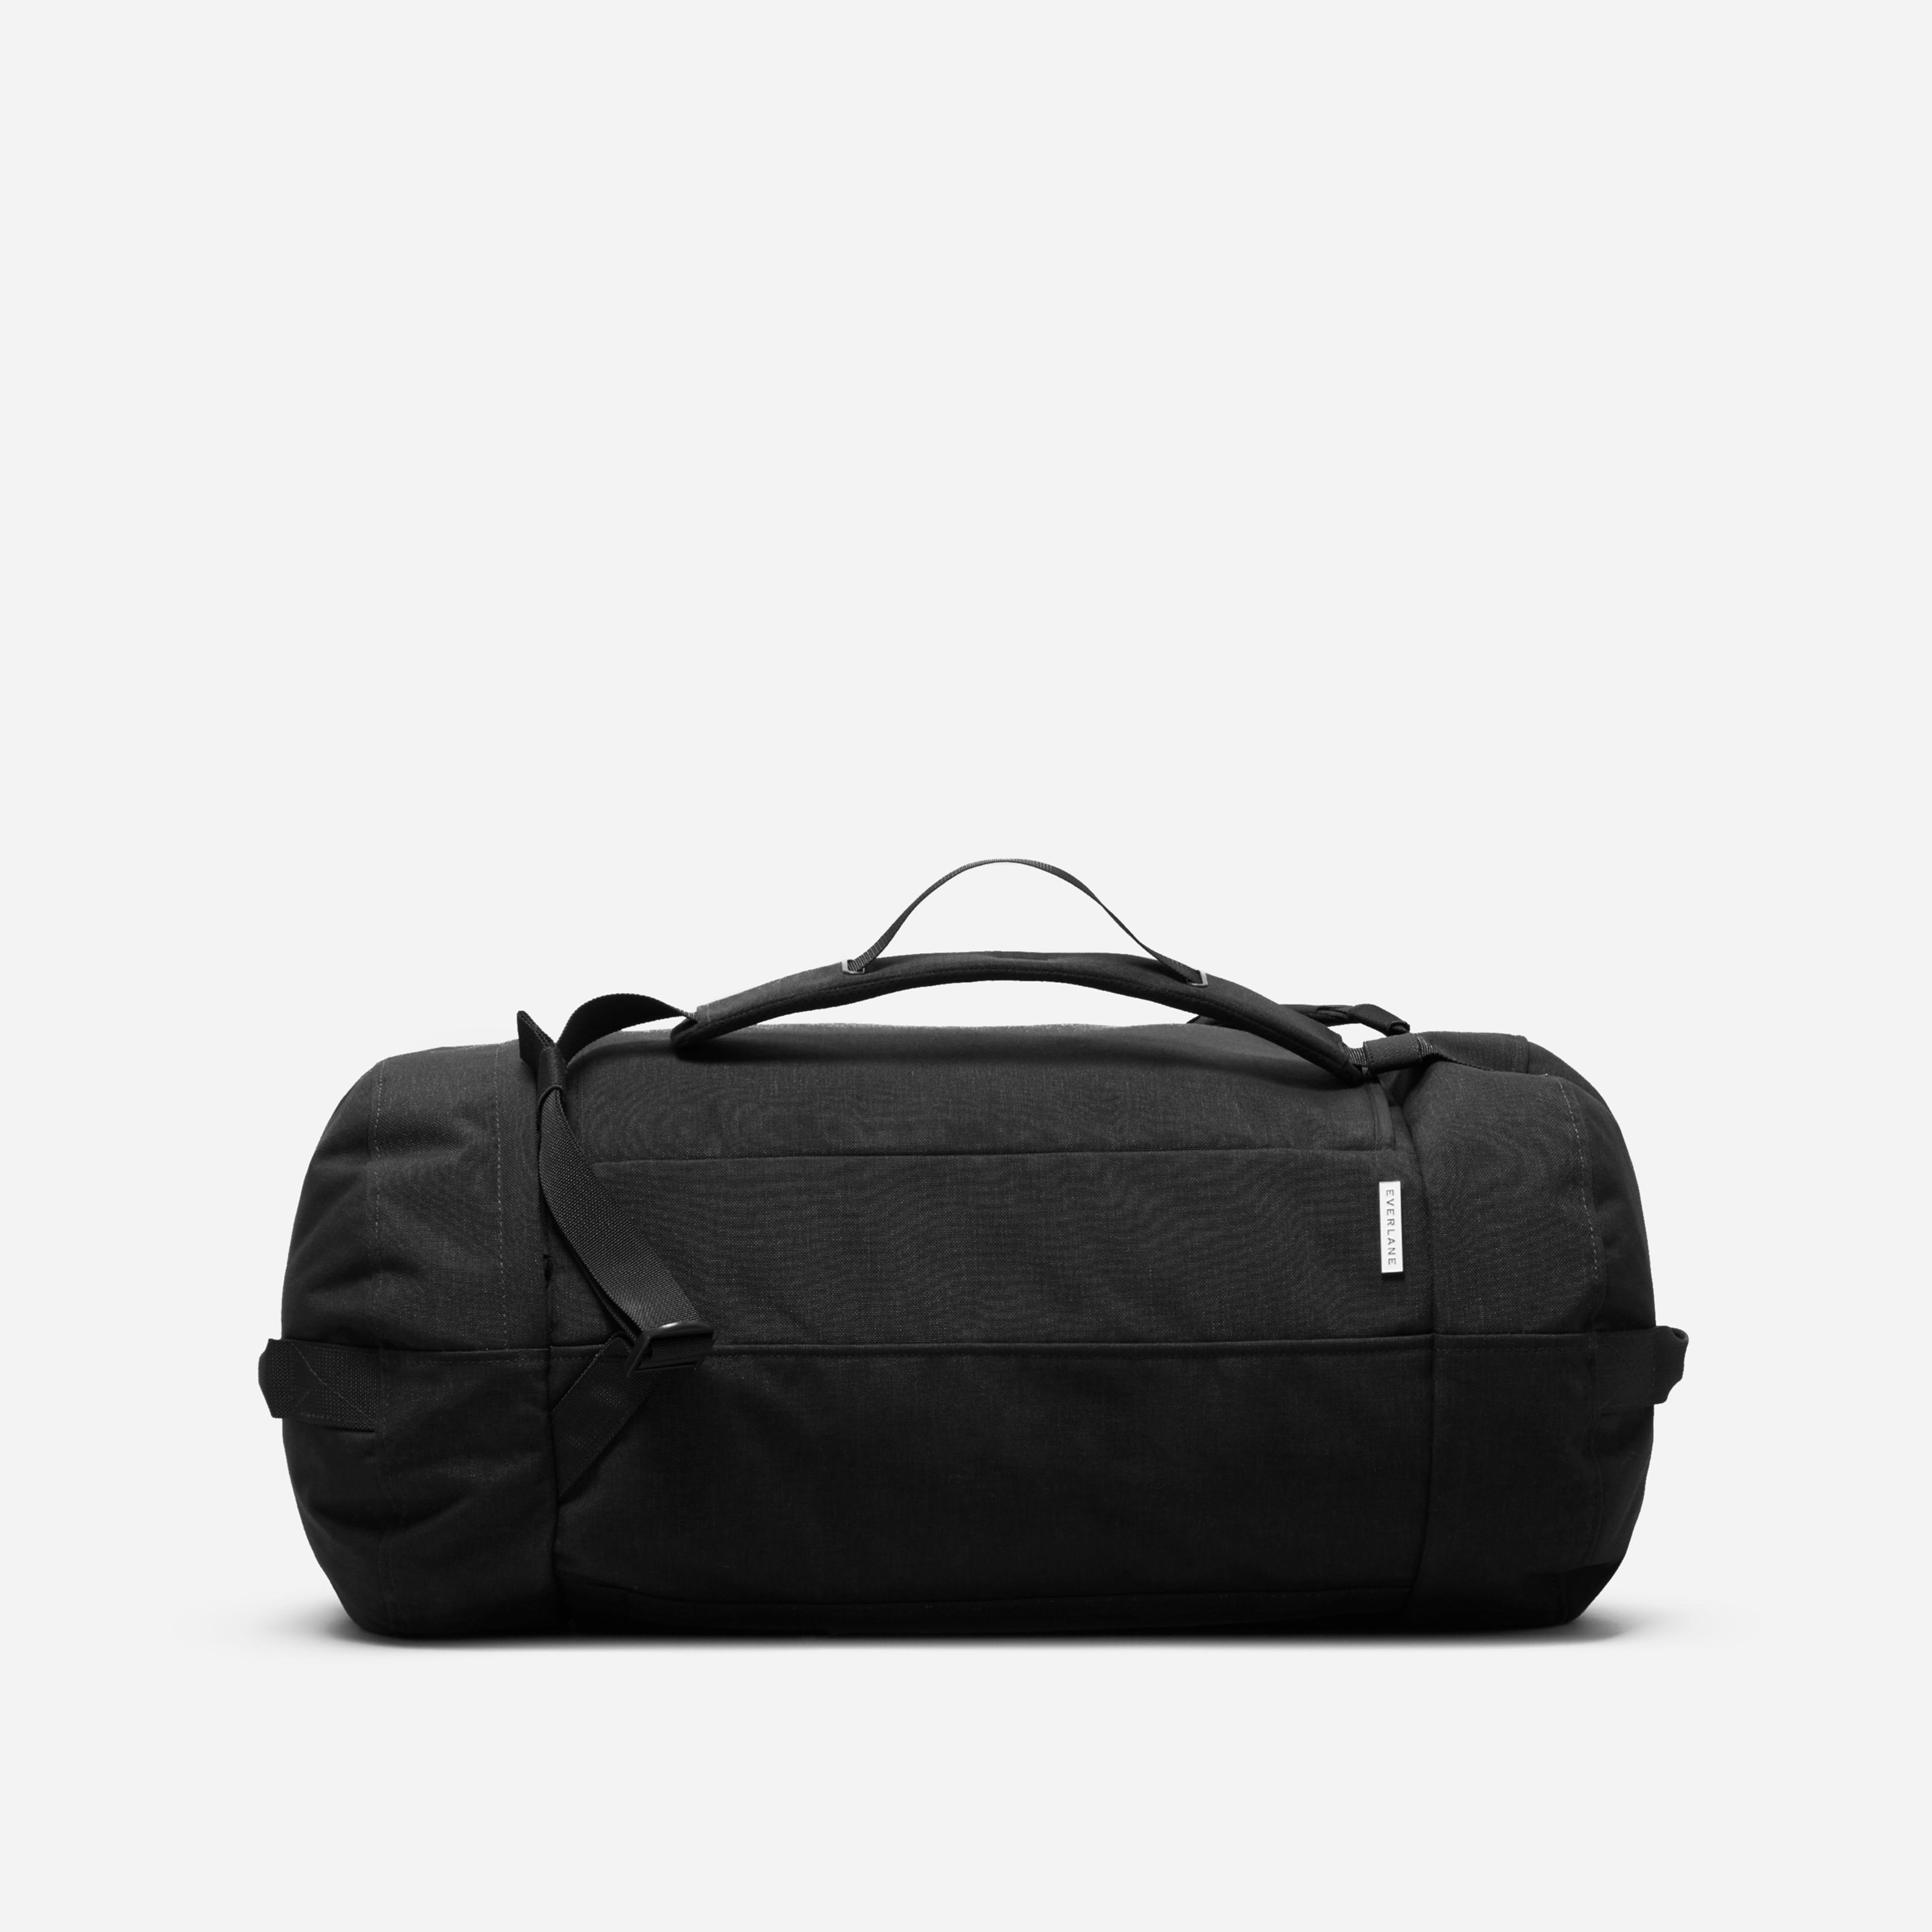 M mover bag